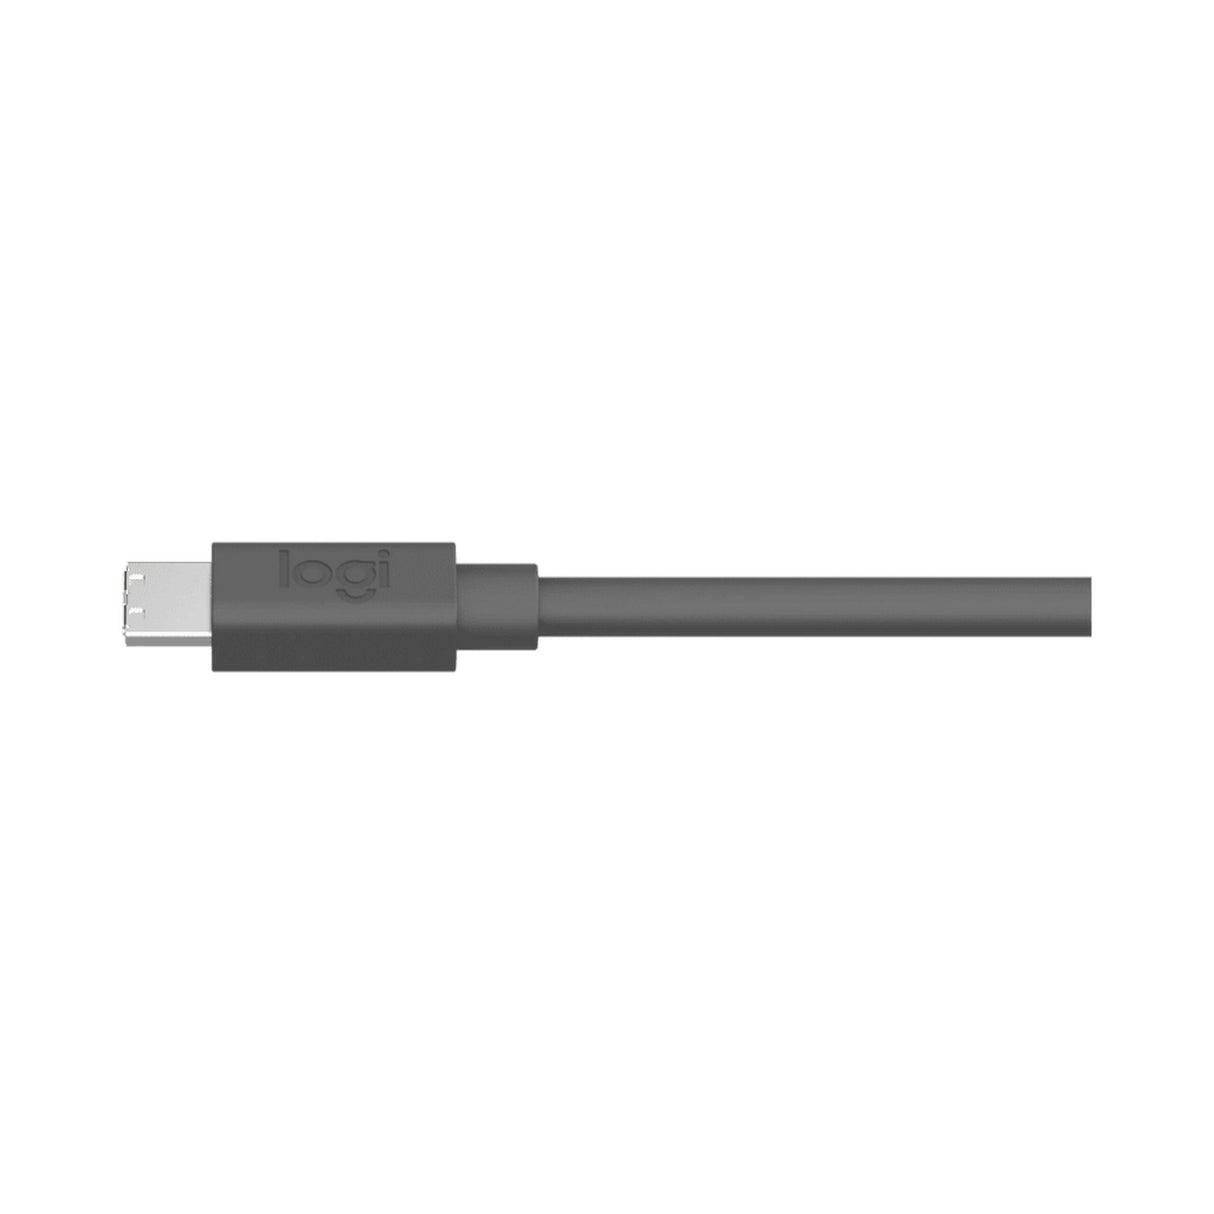 Logitech MeetUp Microphone Extension Cable, 10 Meters